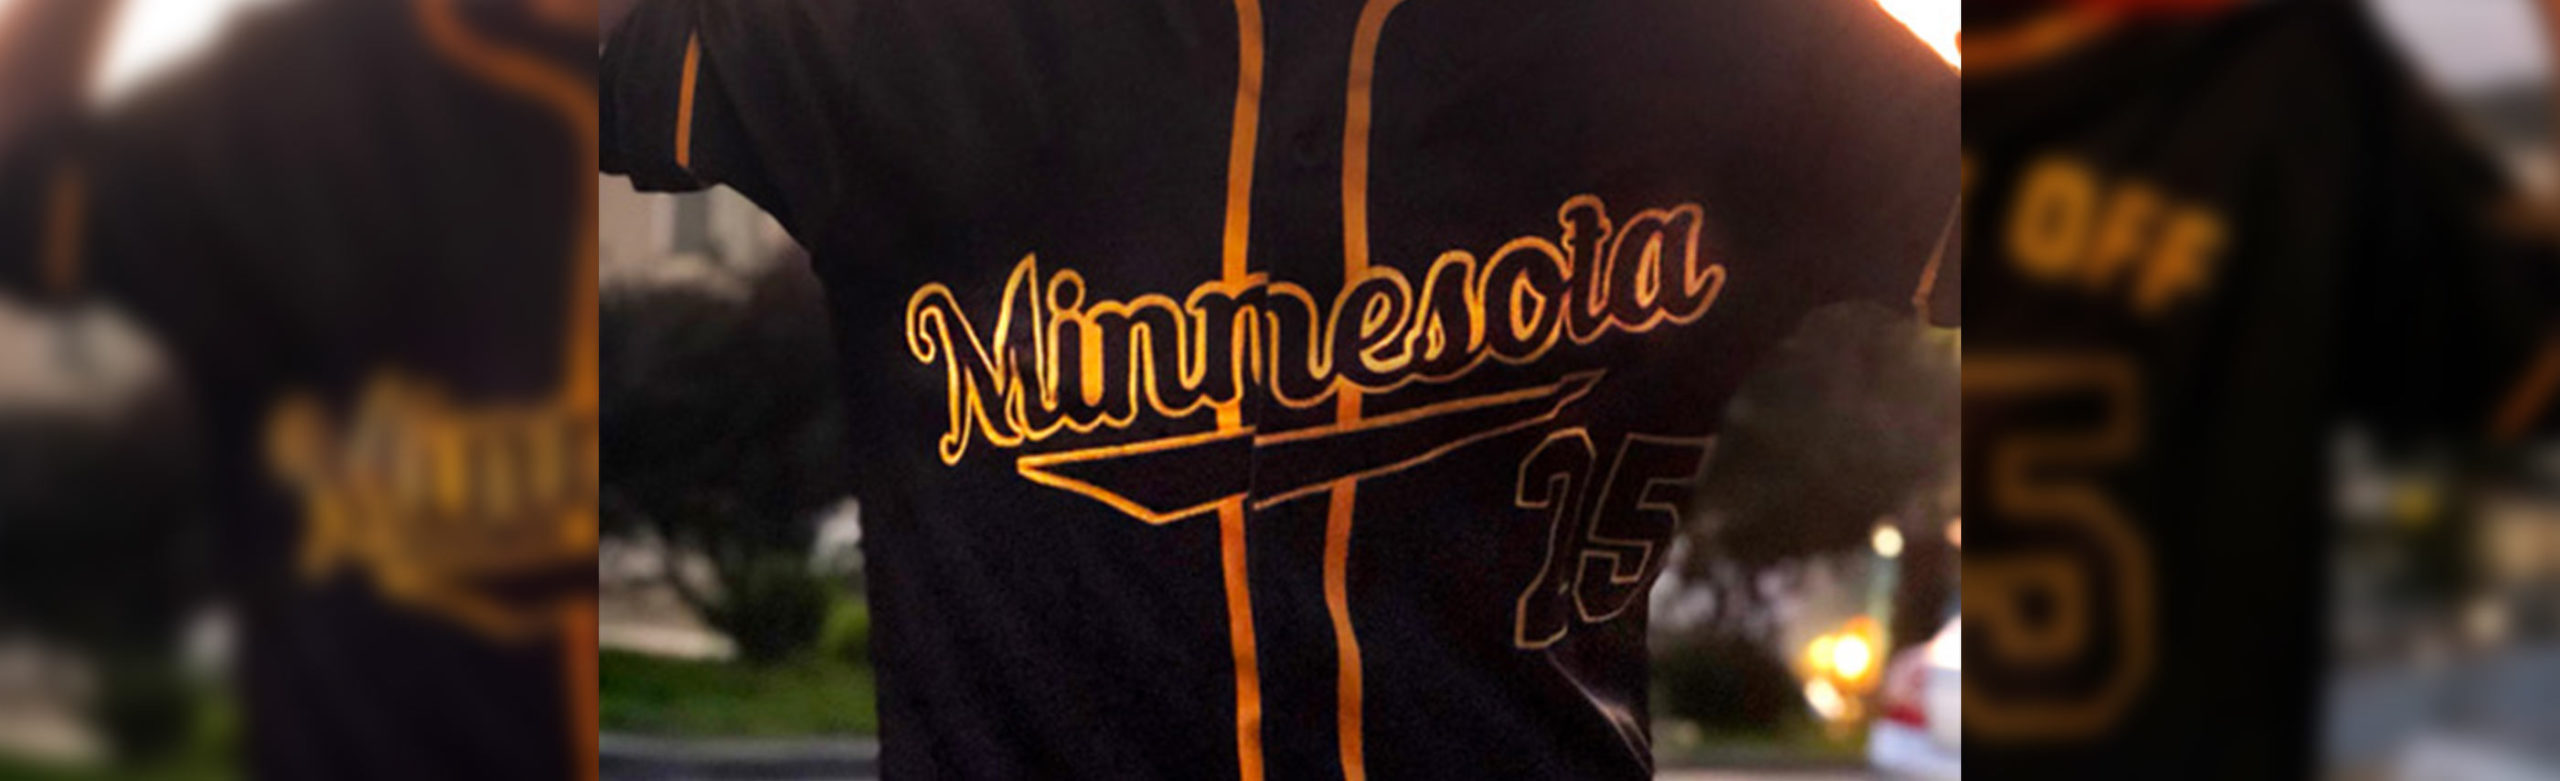 Minnesota Tickets + Jersey Giveaway Image